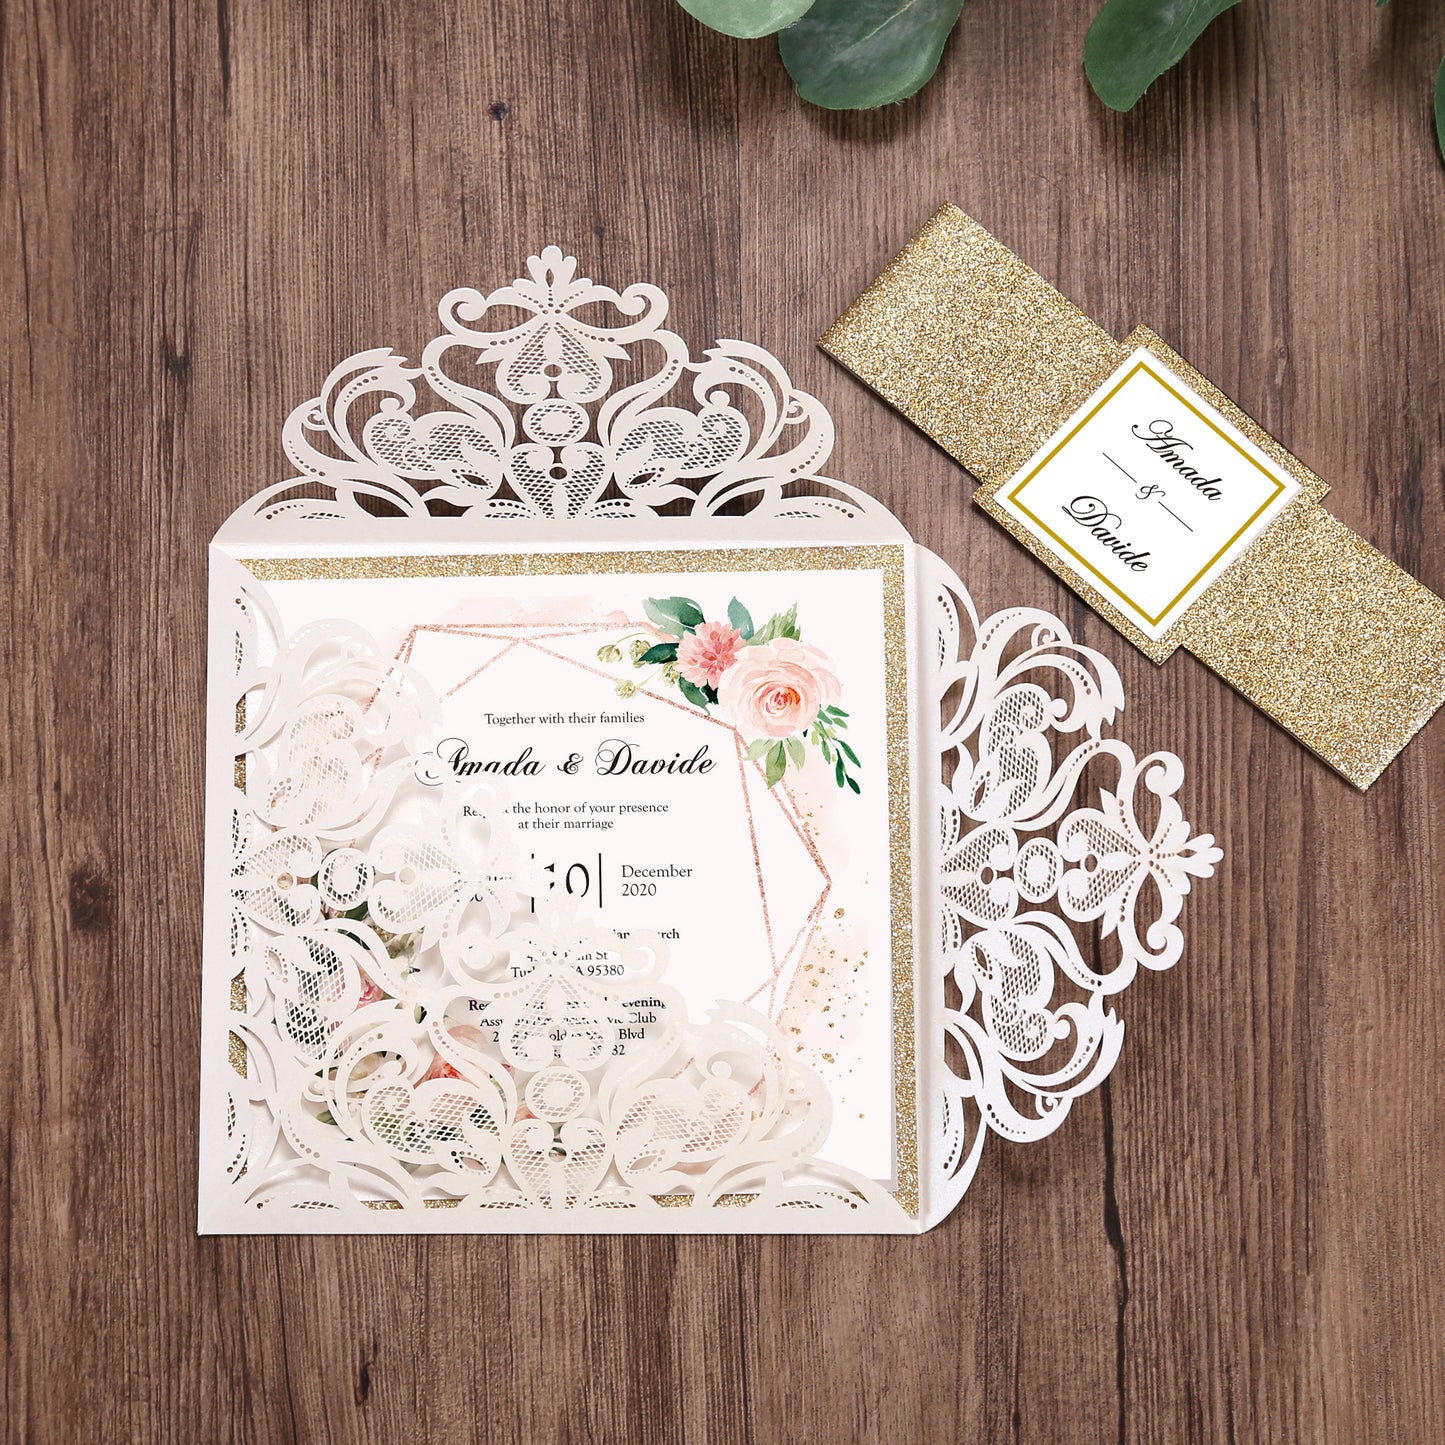 Square Gold Wedding Invitations for Wedding, Bridal Shower, Dinner, Party